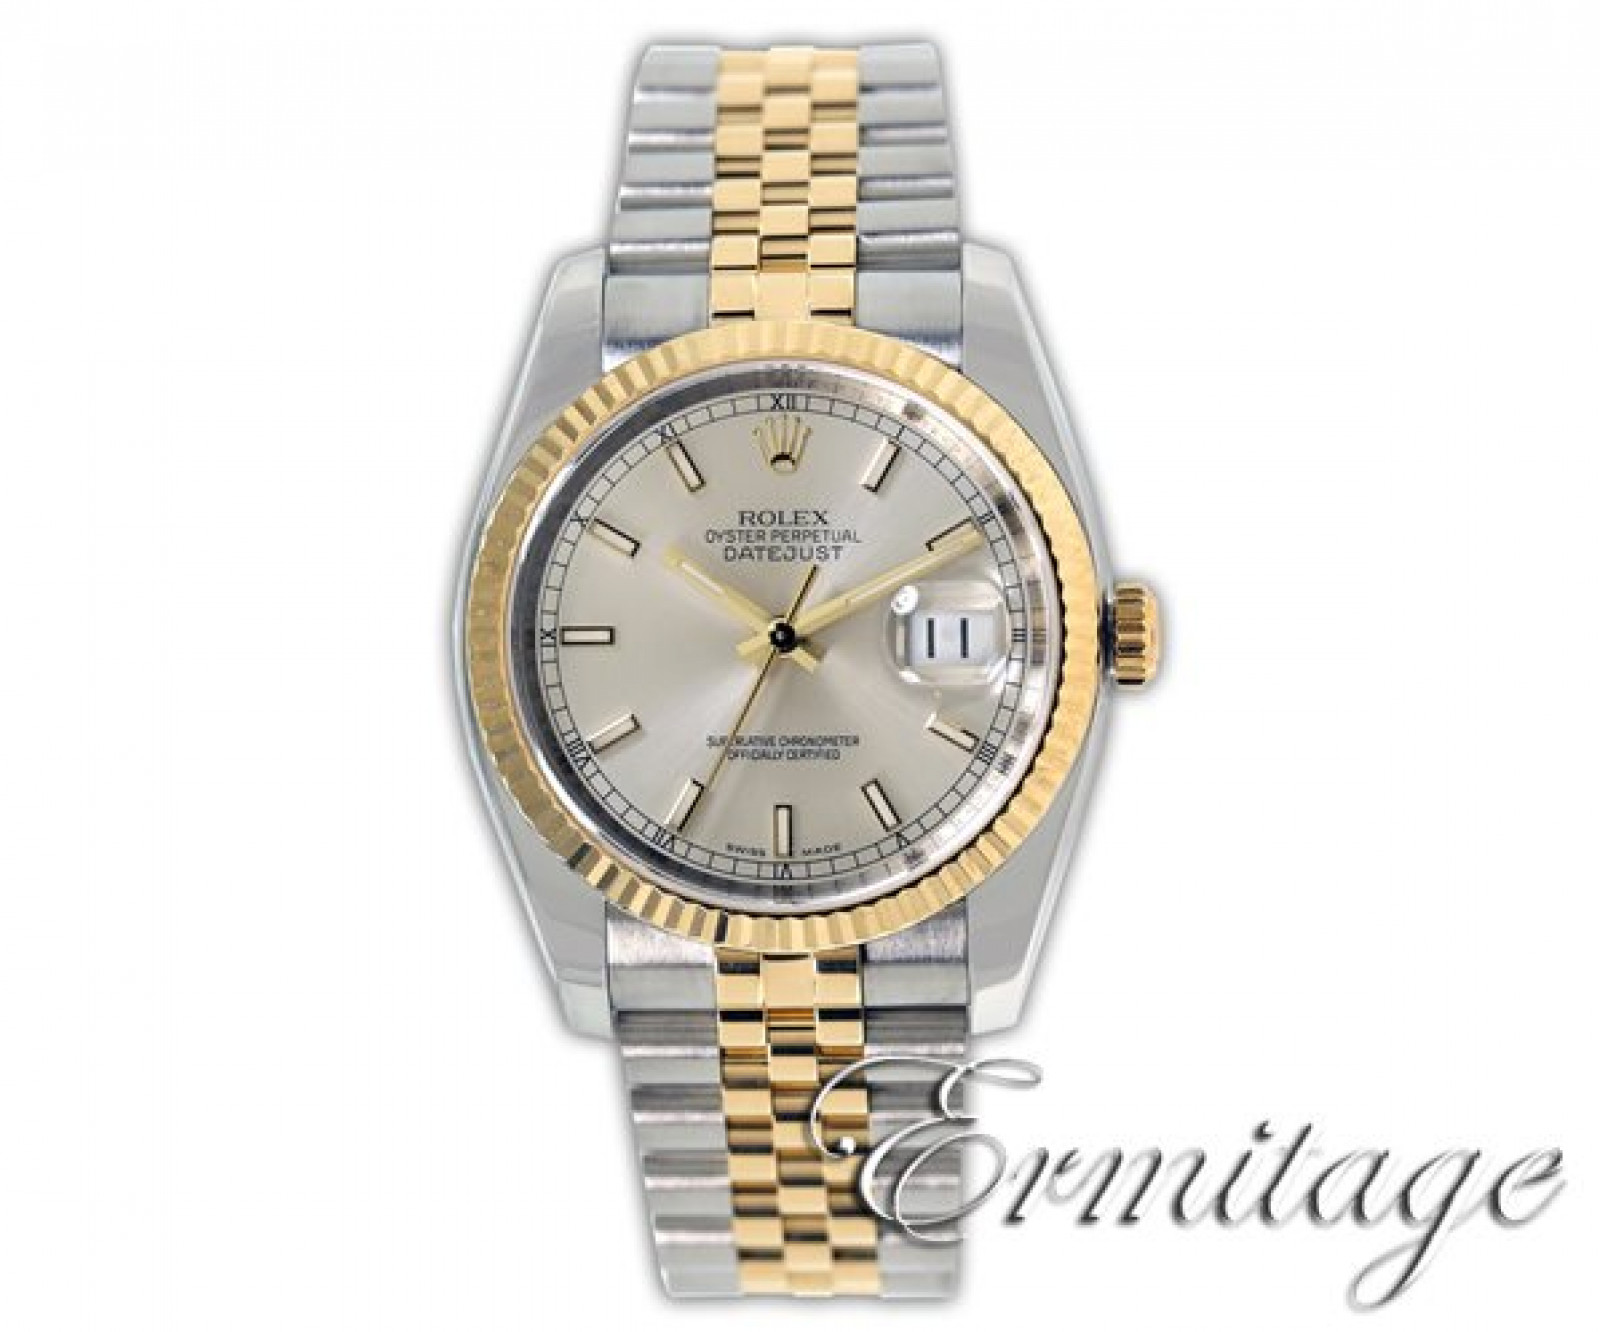 Rolex Oyster Perpetual Datejust 116233 Gold & Steel